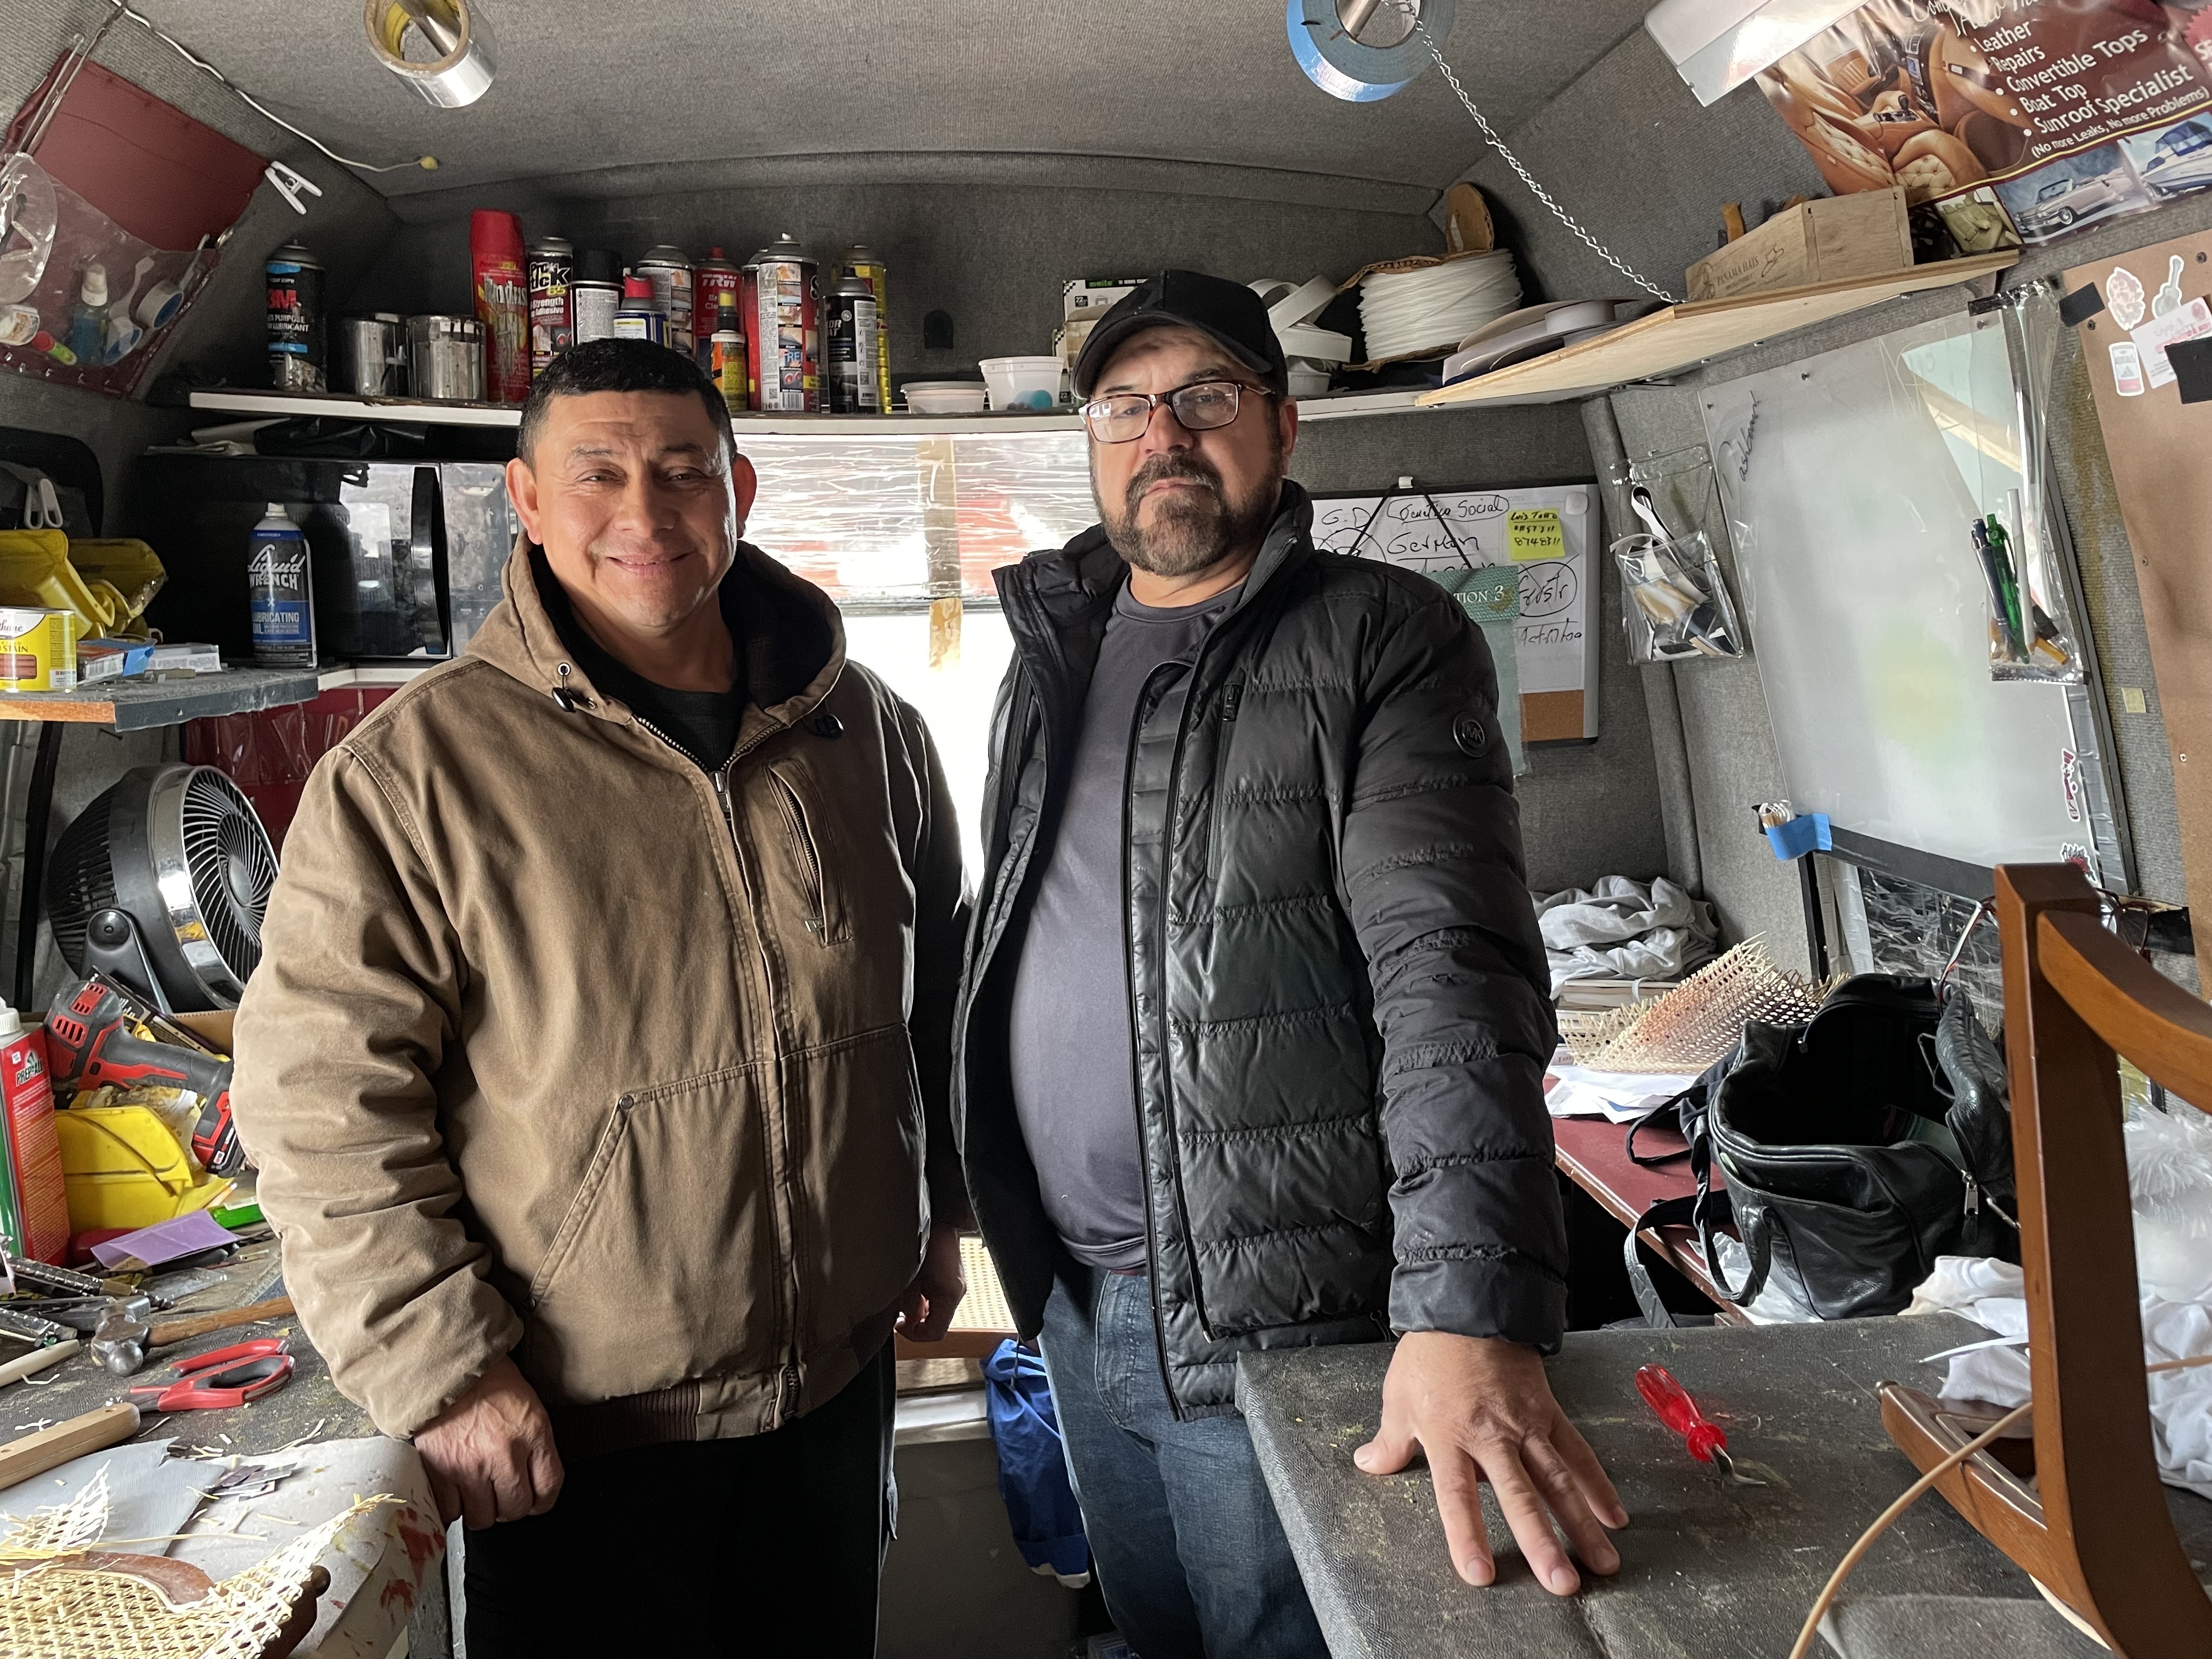 Arturo Olaya, right, and Javier Tomala are among the dwindling number of autobody mechanics in Willets Point.